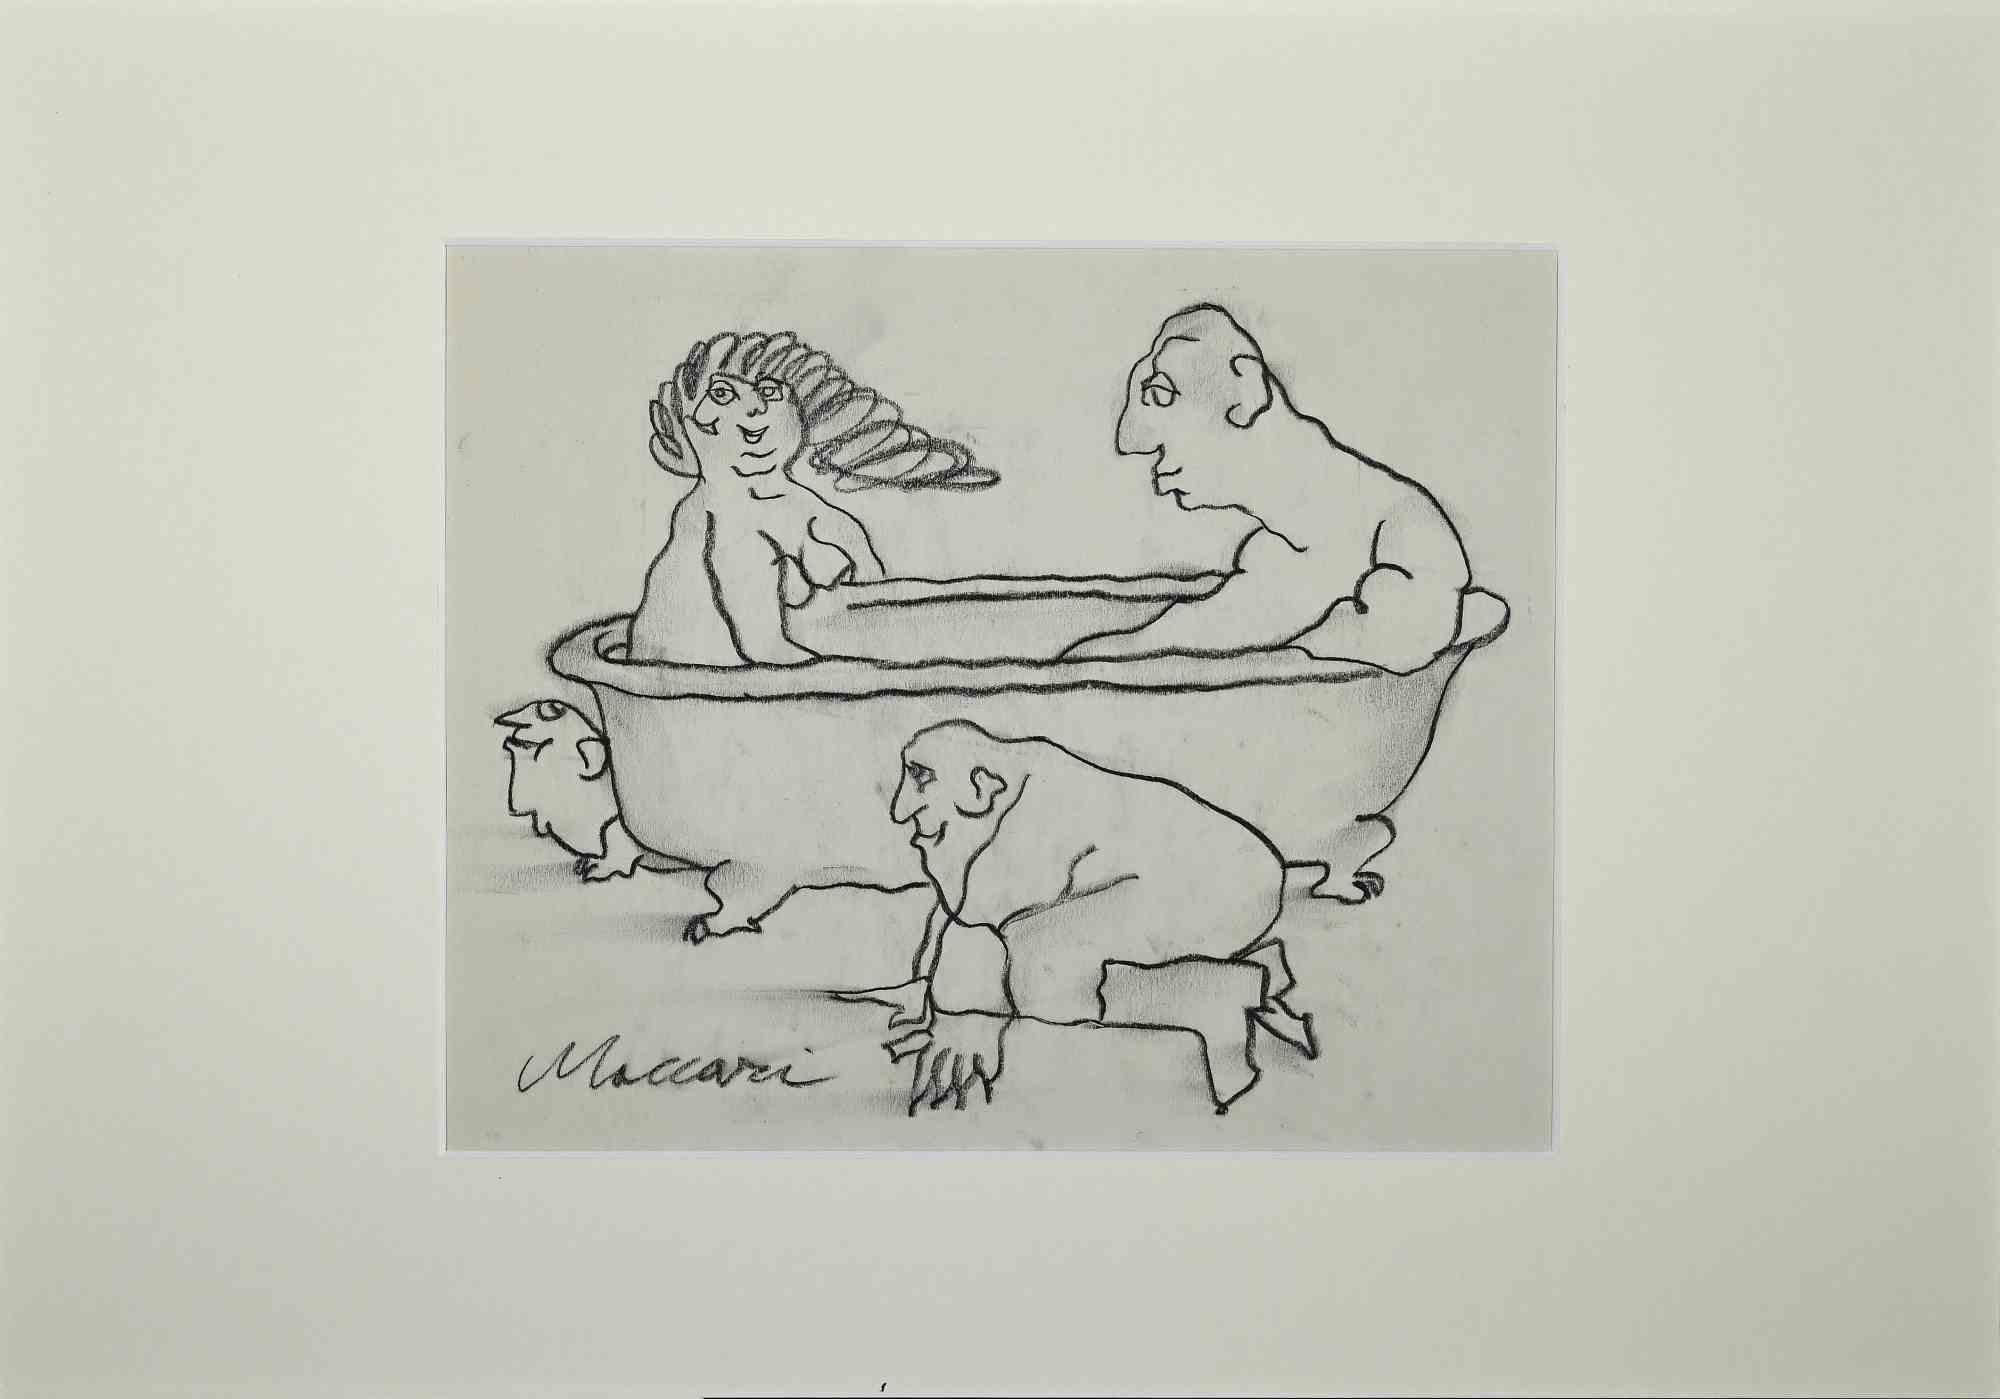 The Bath is an original drawing realized by Mino Maccari in Mid-20th Century.

Beautiful black and while charcoal drawing on ivory-colored paper. 

Good condition on a yellowed paper.

Hand-signed by the artist.     

Mino Maccari (1898-1989) was an